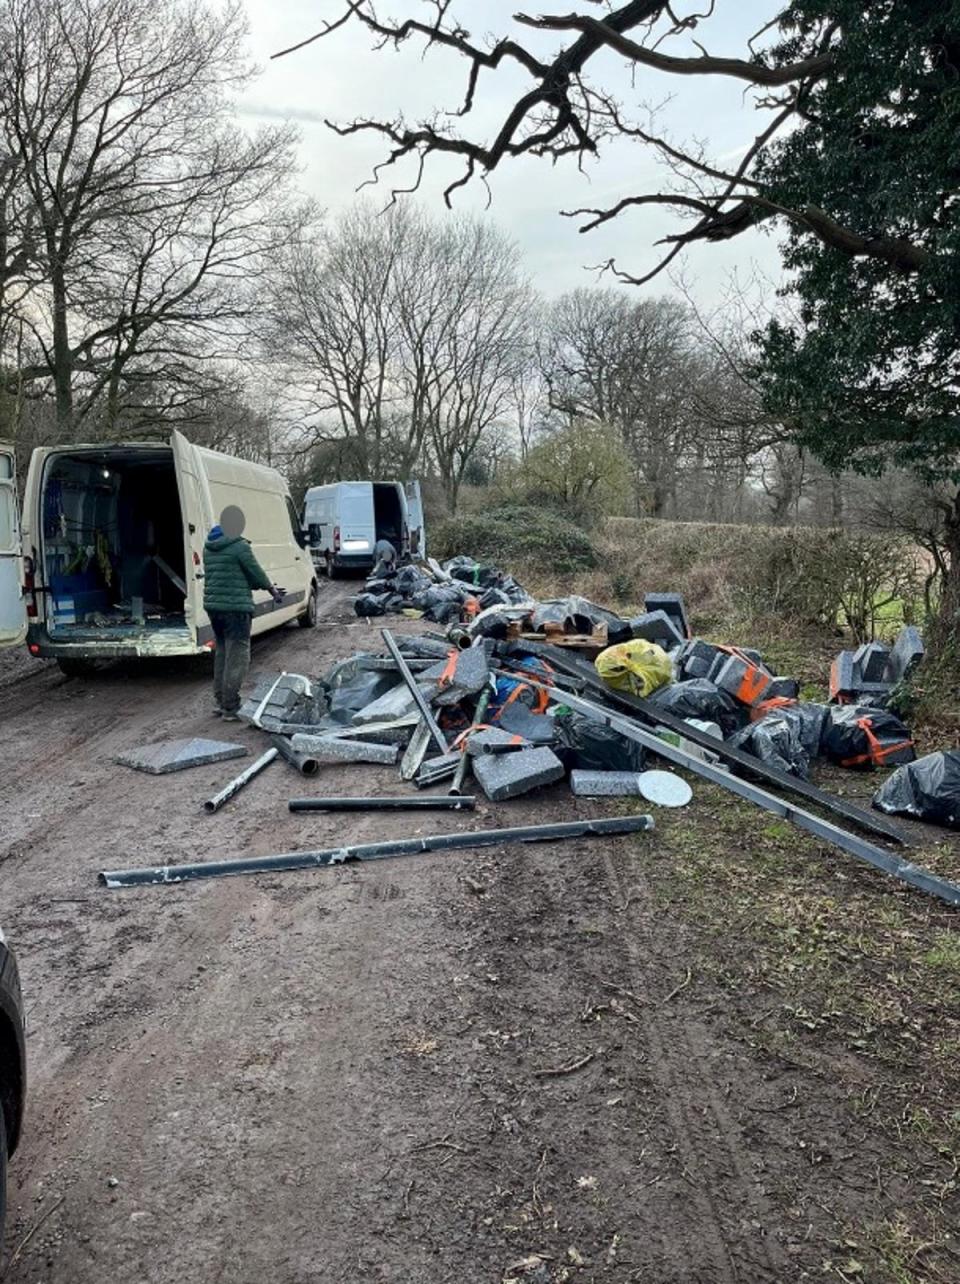 The rubbish dumped on the farm track by Ionut Bancunlea and Adrian Bivolaru from their vans (Warwickshire Police)